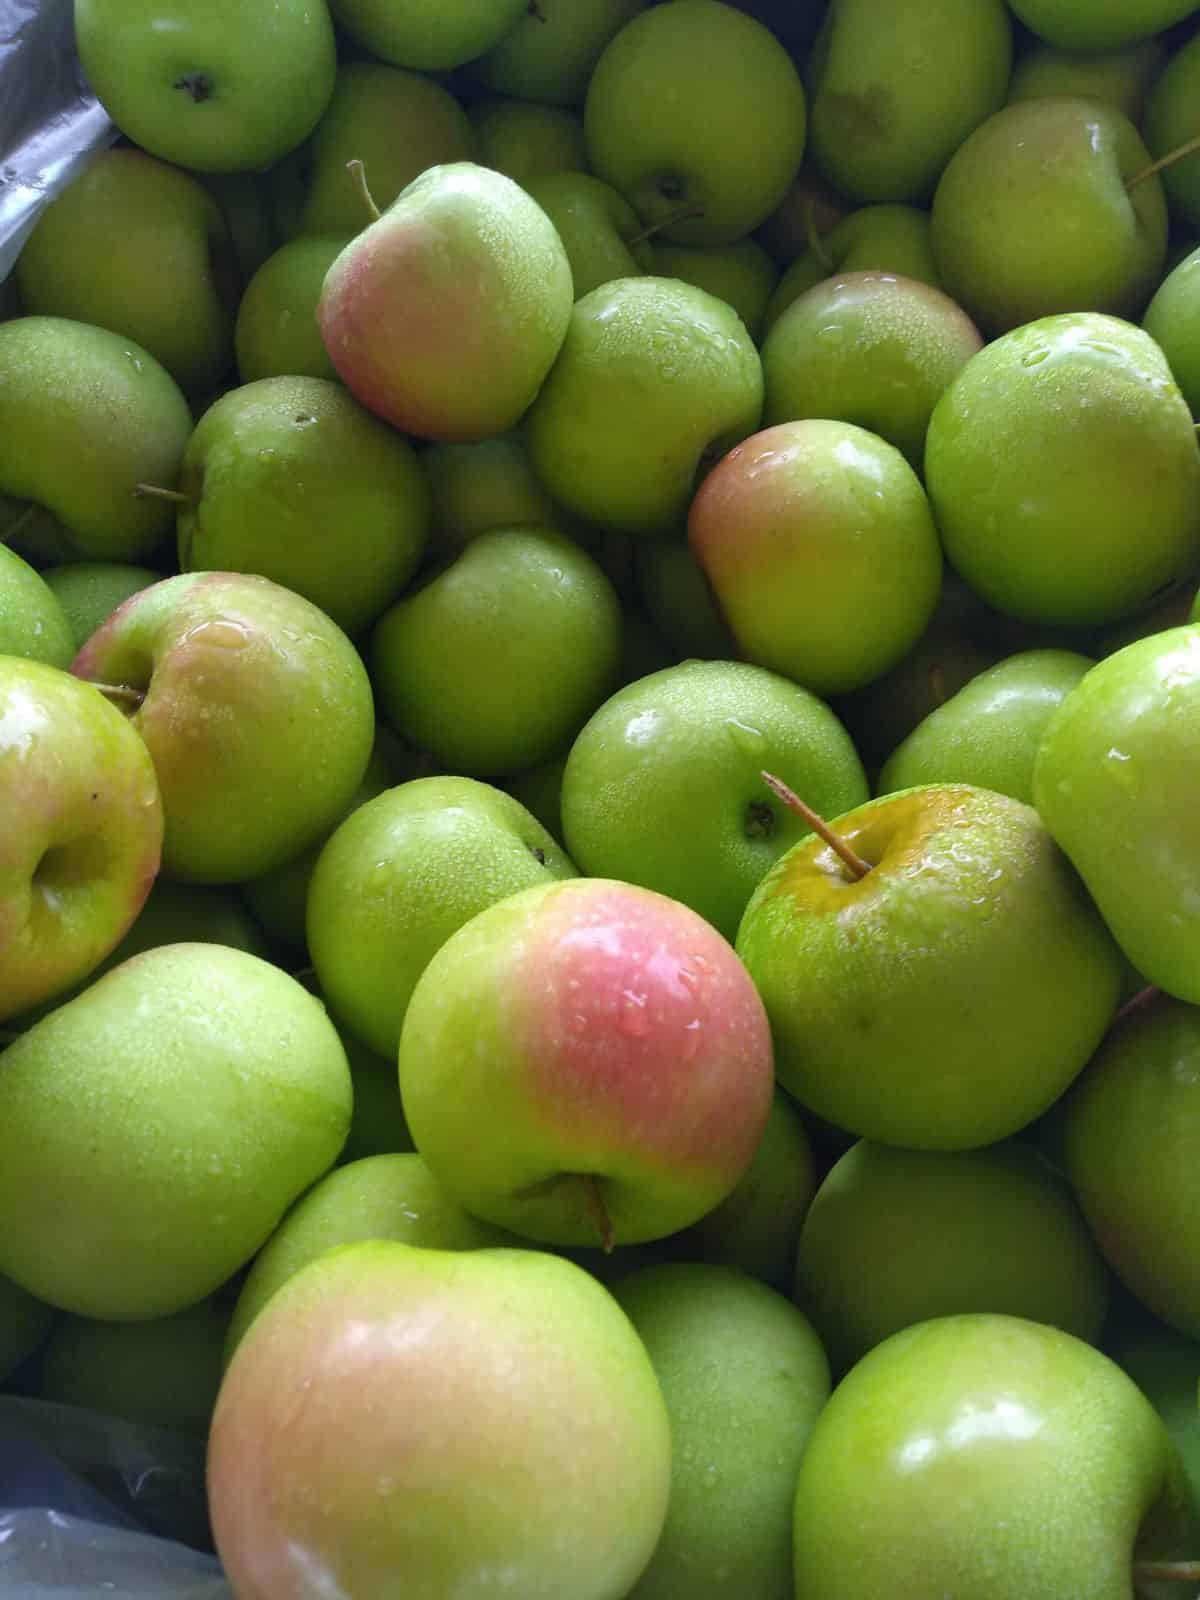 A close up of green Shamrock apples in a bin. Some of the apples have red blush on them.